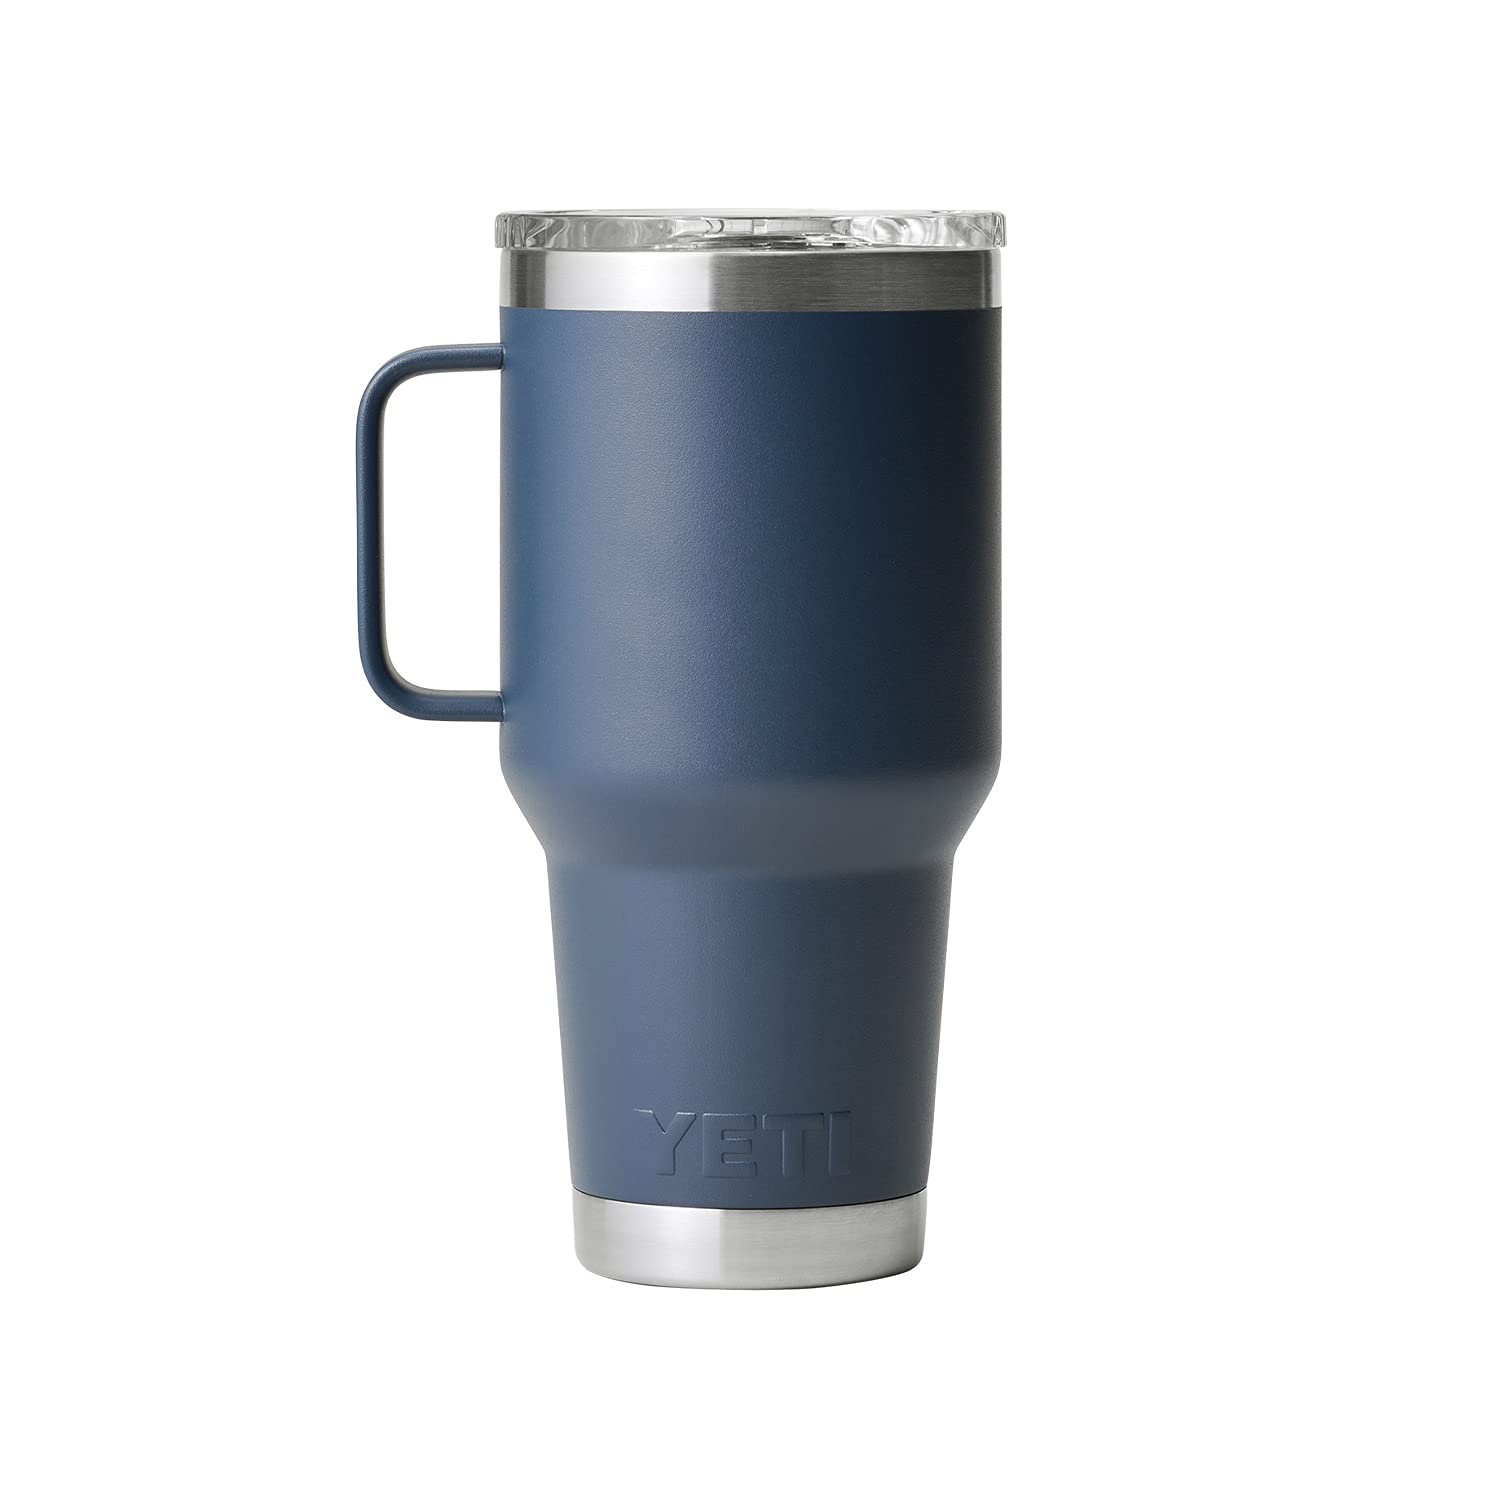 YETI Rambler 30 oz Travel Mug, Stainless Steel, Vacuum Insulated with Stronghold Lid